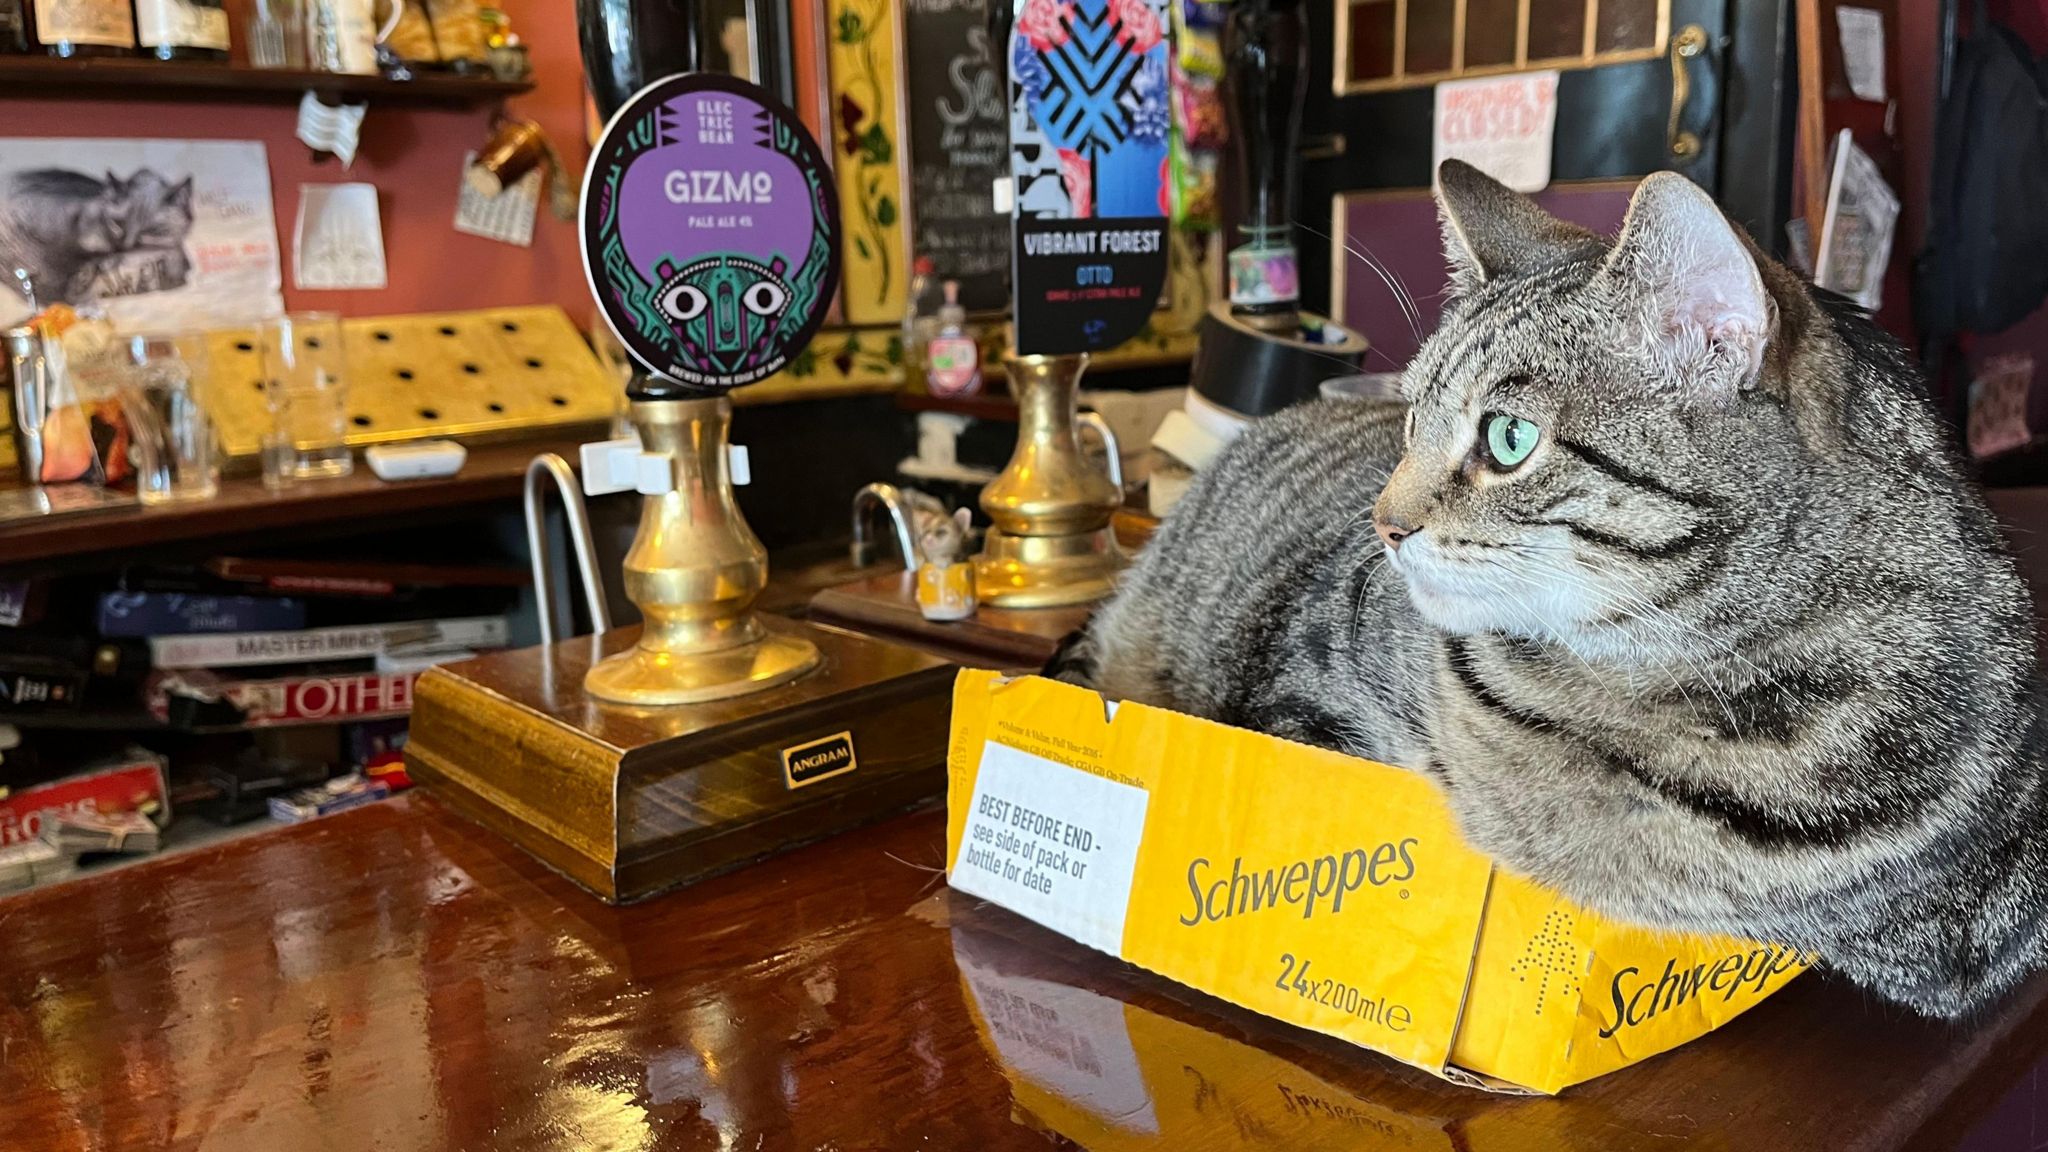 A cat sits on the bar by the beer pumps at the Bag O'Nails Pub in Bristol city centre